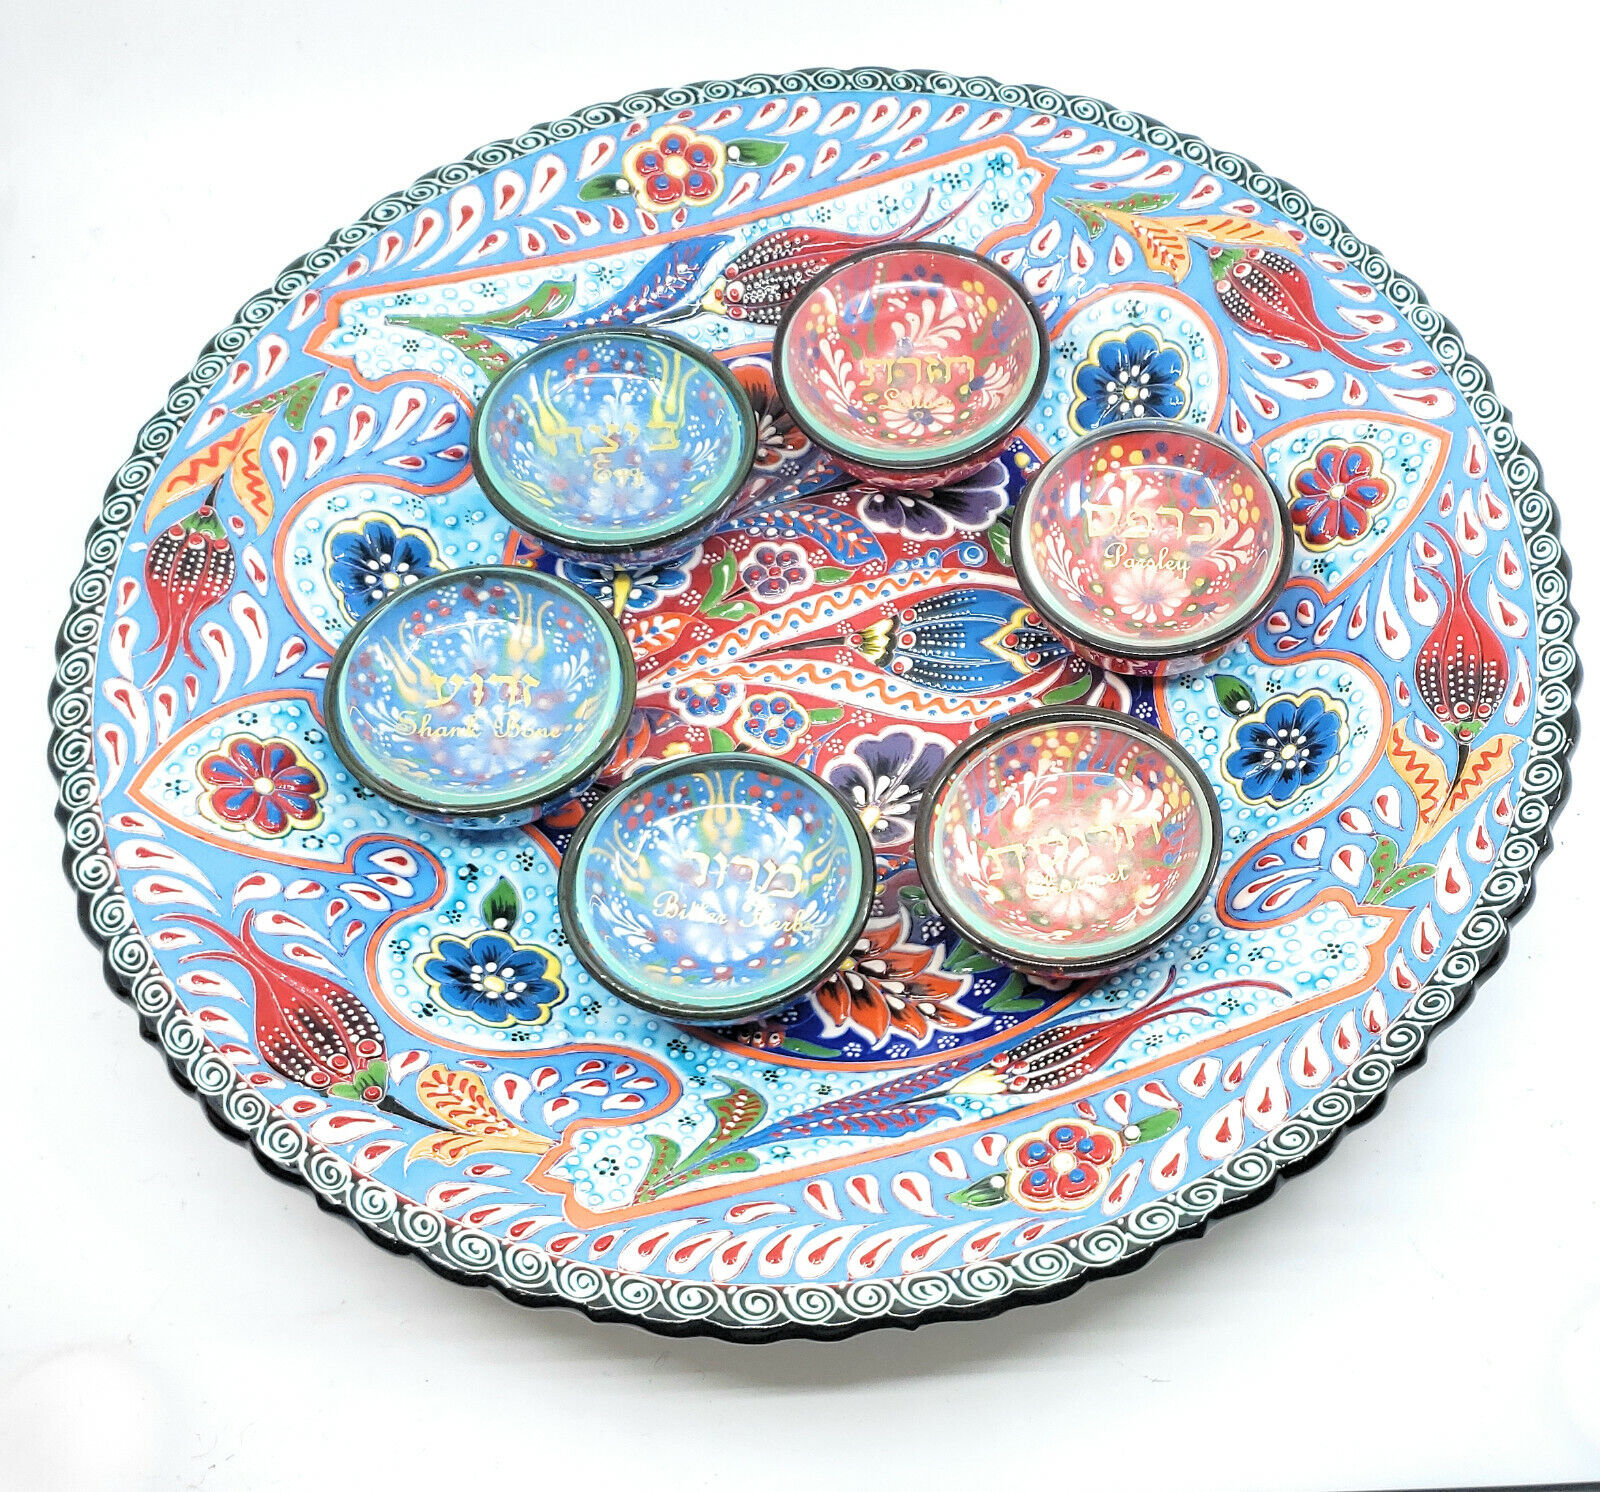 Unique Large Seder Plate Handmade Of Turkish Traditional Ceramic Pottery 16"